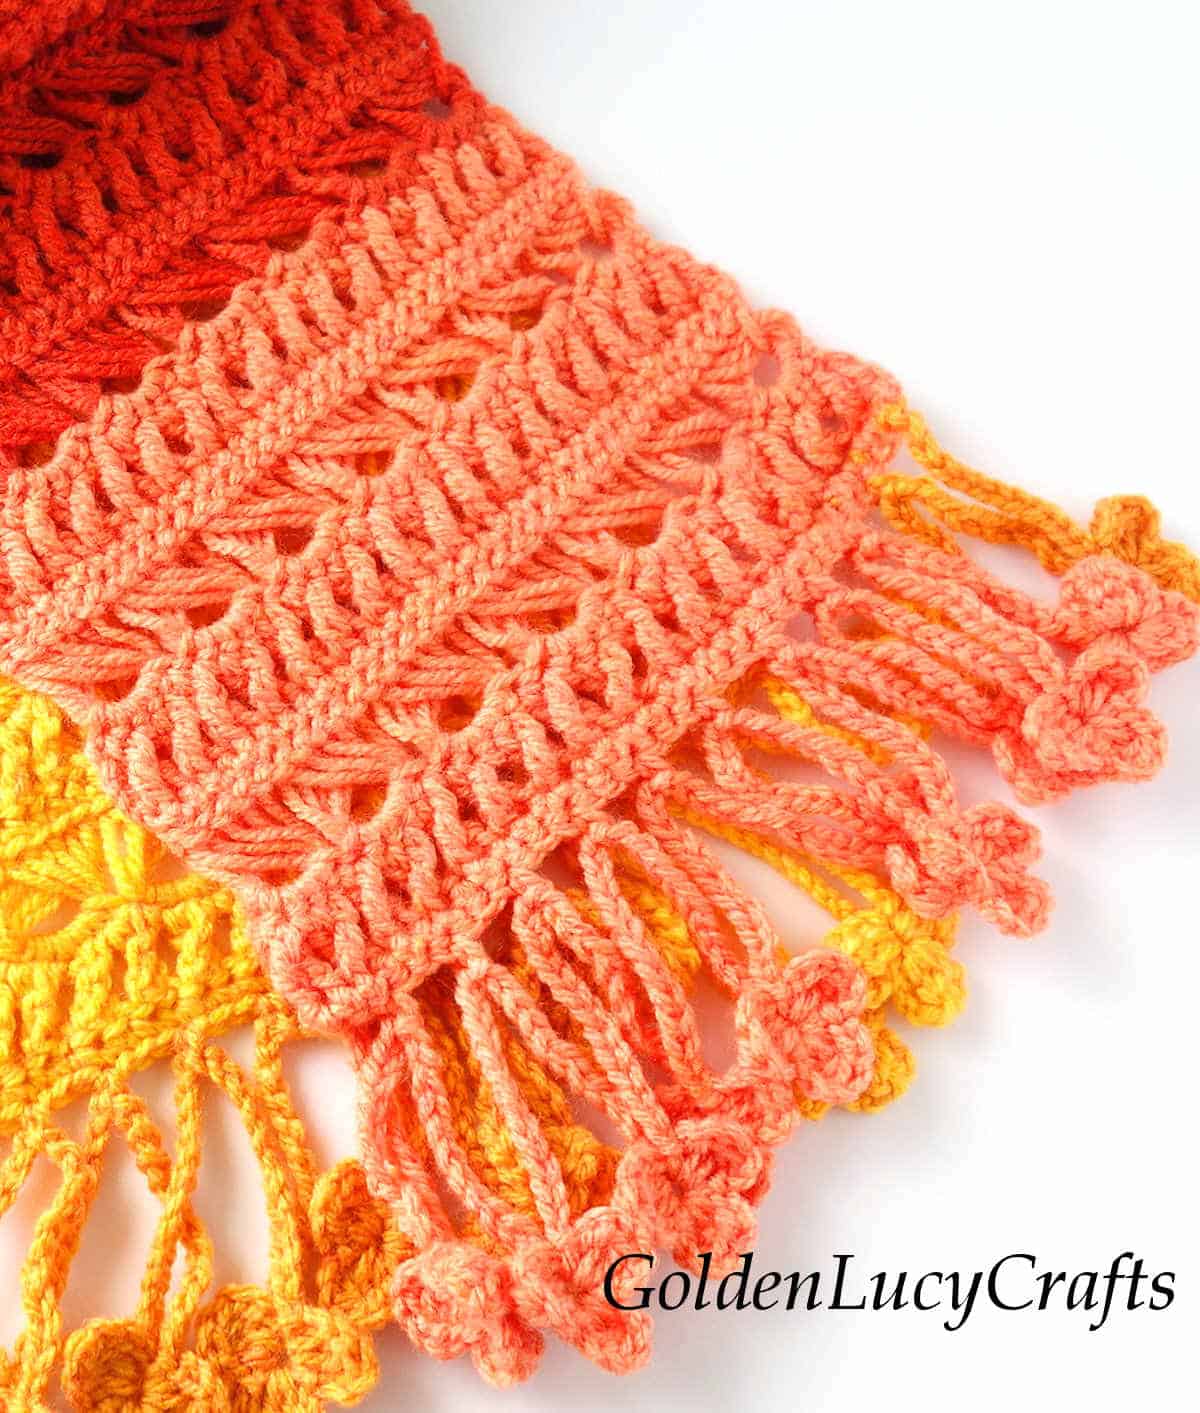 Crocheted scarf close up picture.